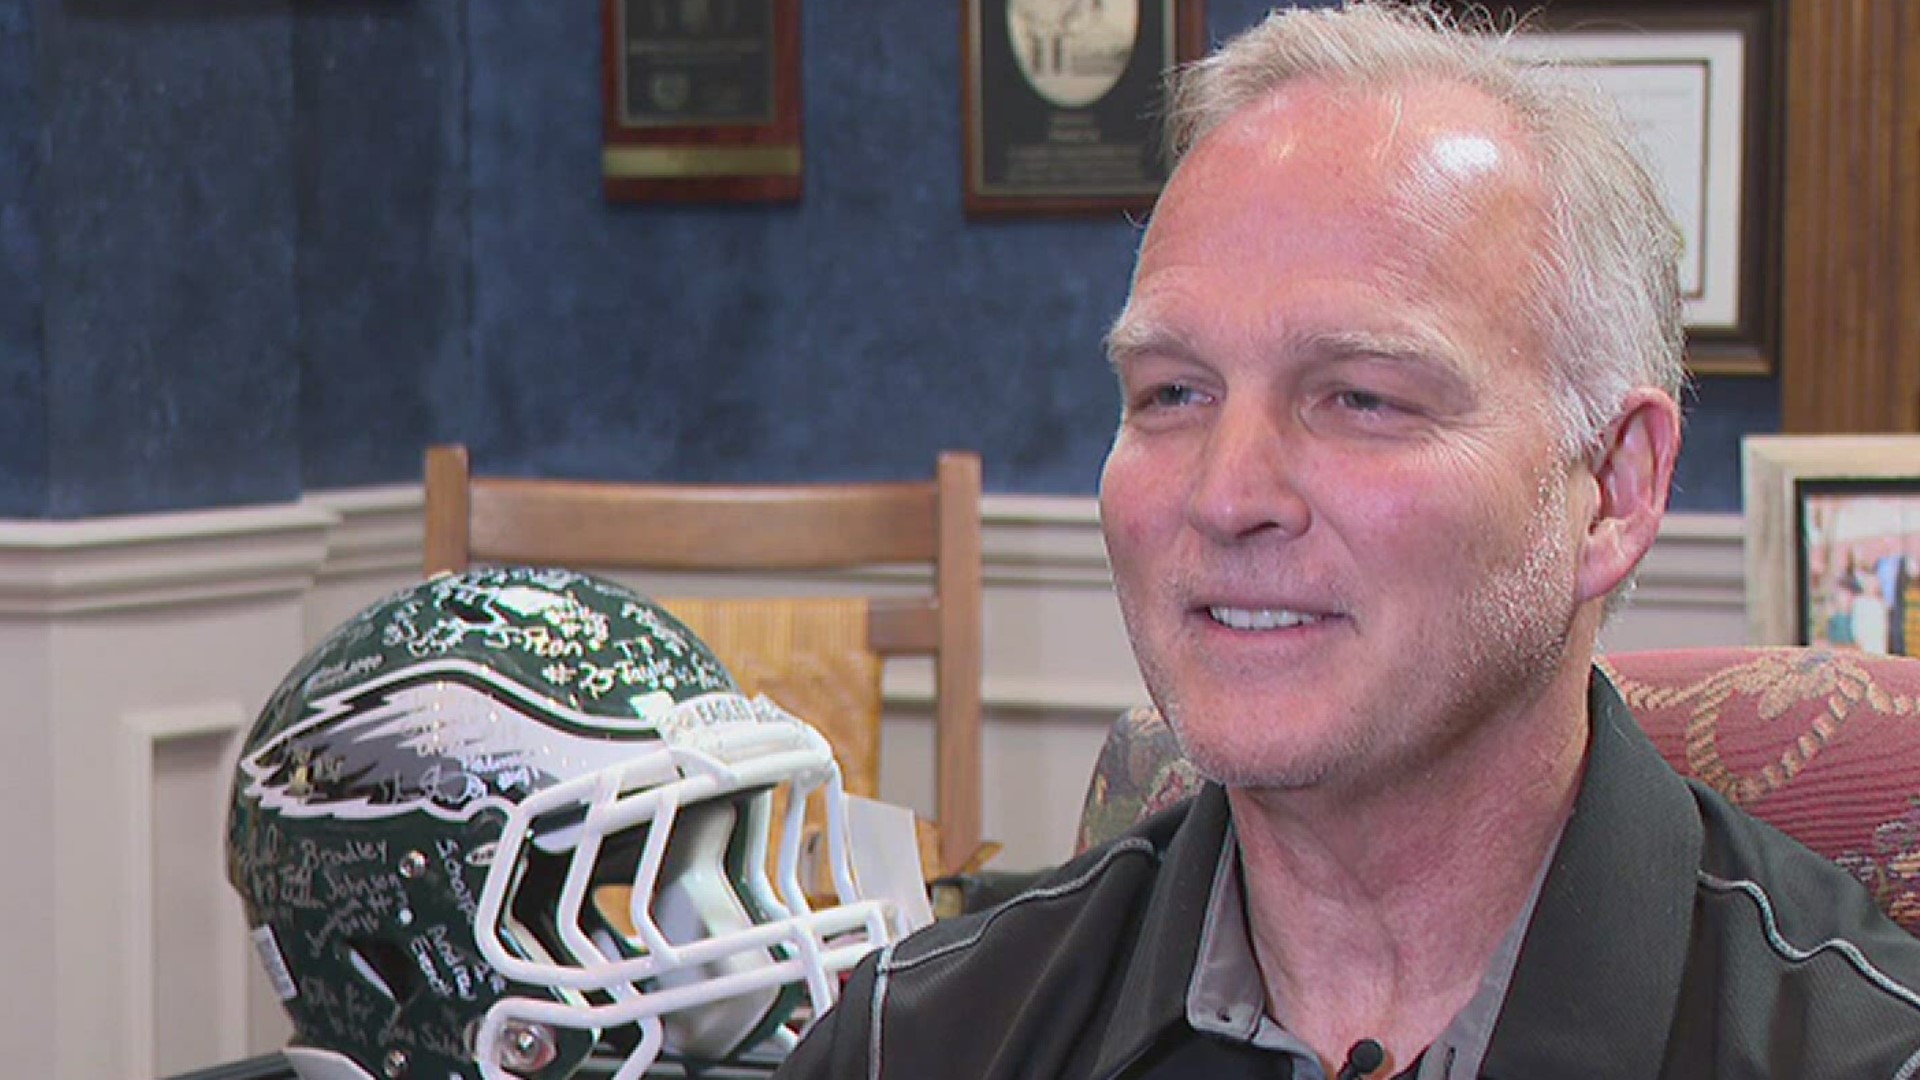 Longtime former UGA head football coach Mark Richt was recently diagnosed with Parkinson's. He opens up for the first time on camera about the new diagnosis.